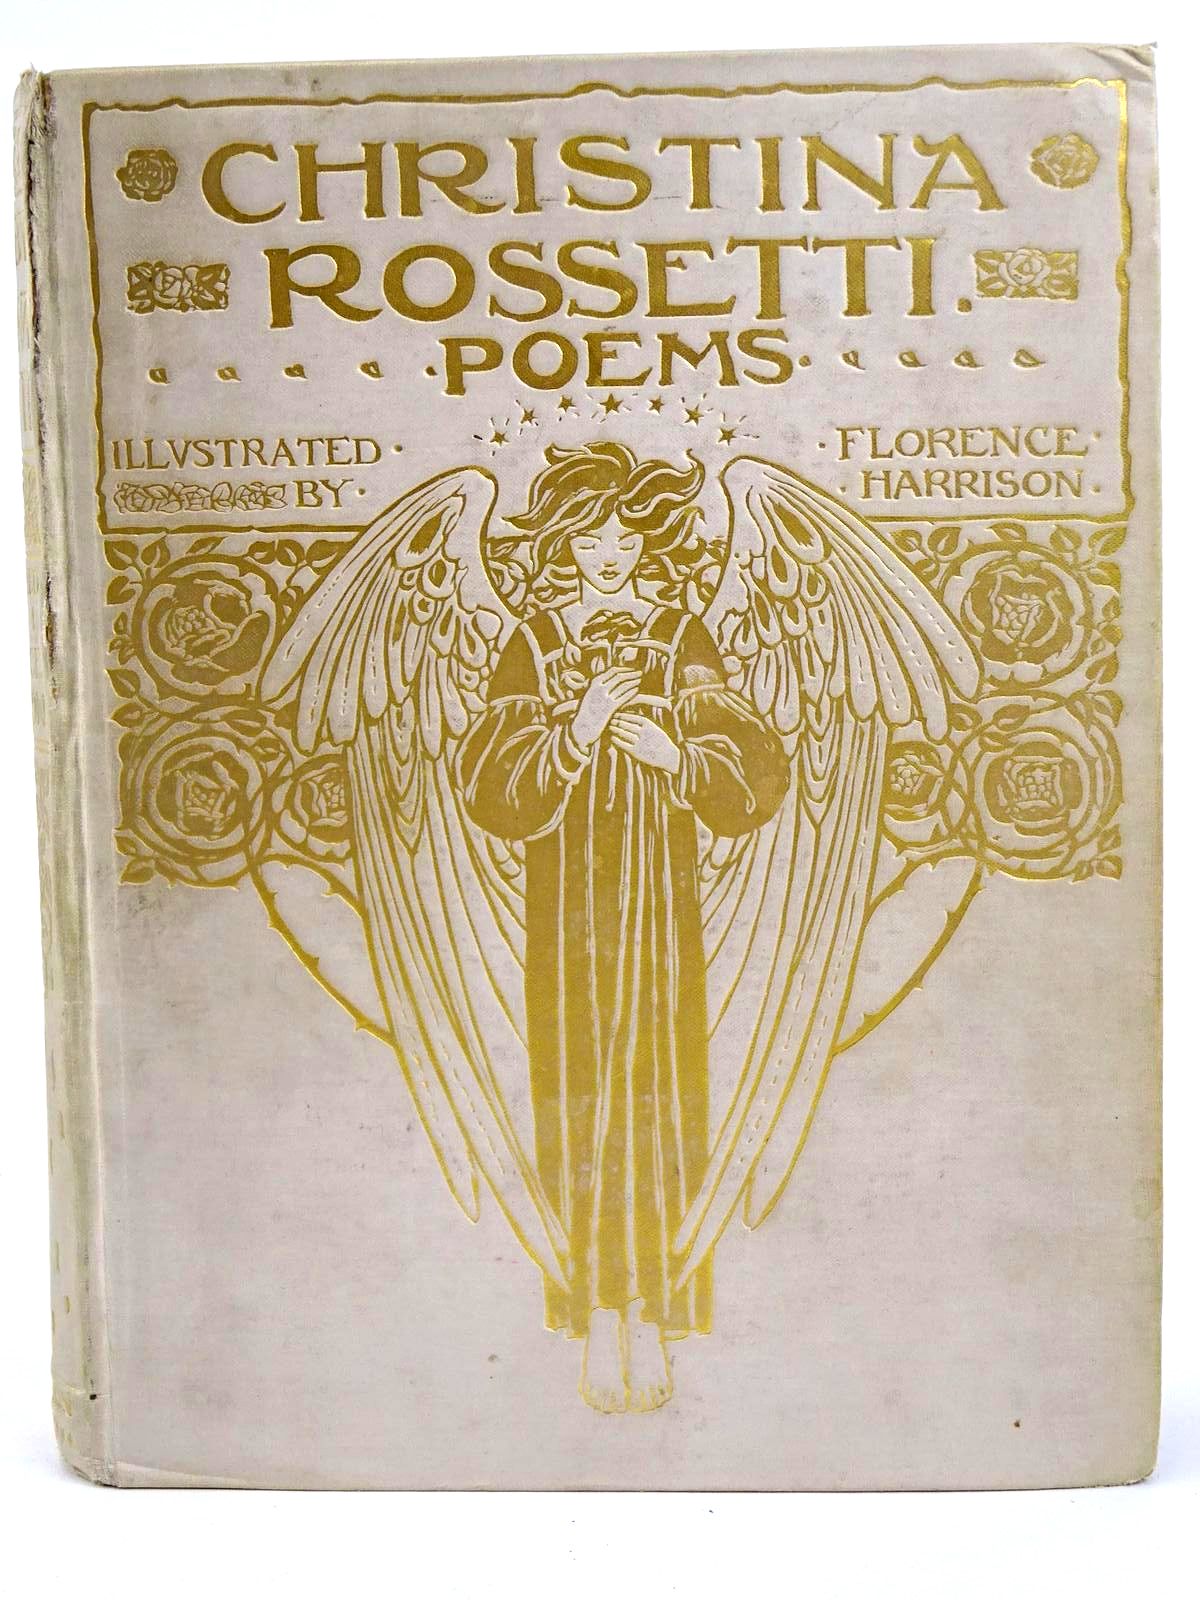 Photo of POEMS BY CHRISTINA ROSSETTI written by Rossetti, Christina illustrated by Harrison, Florence published by Blackie & Son Ltd. (STOCK CODE: 1318326)  for sale by Stella & Rose's Books